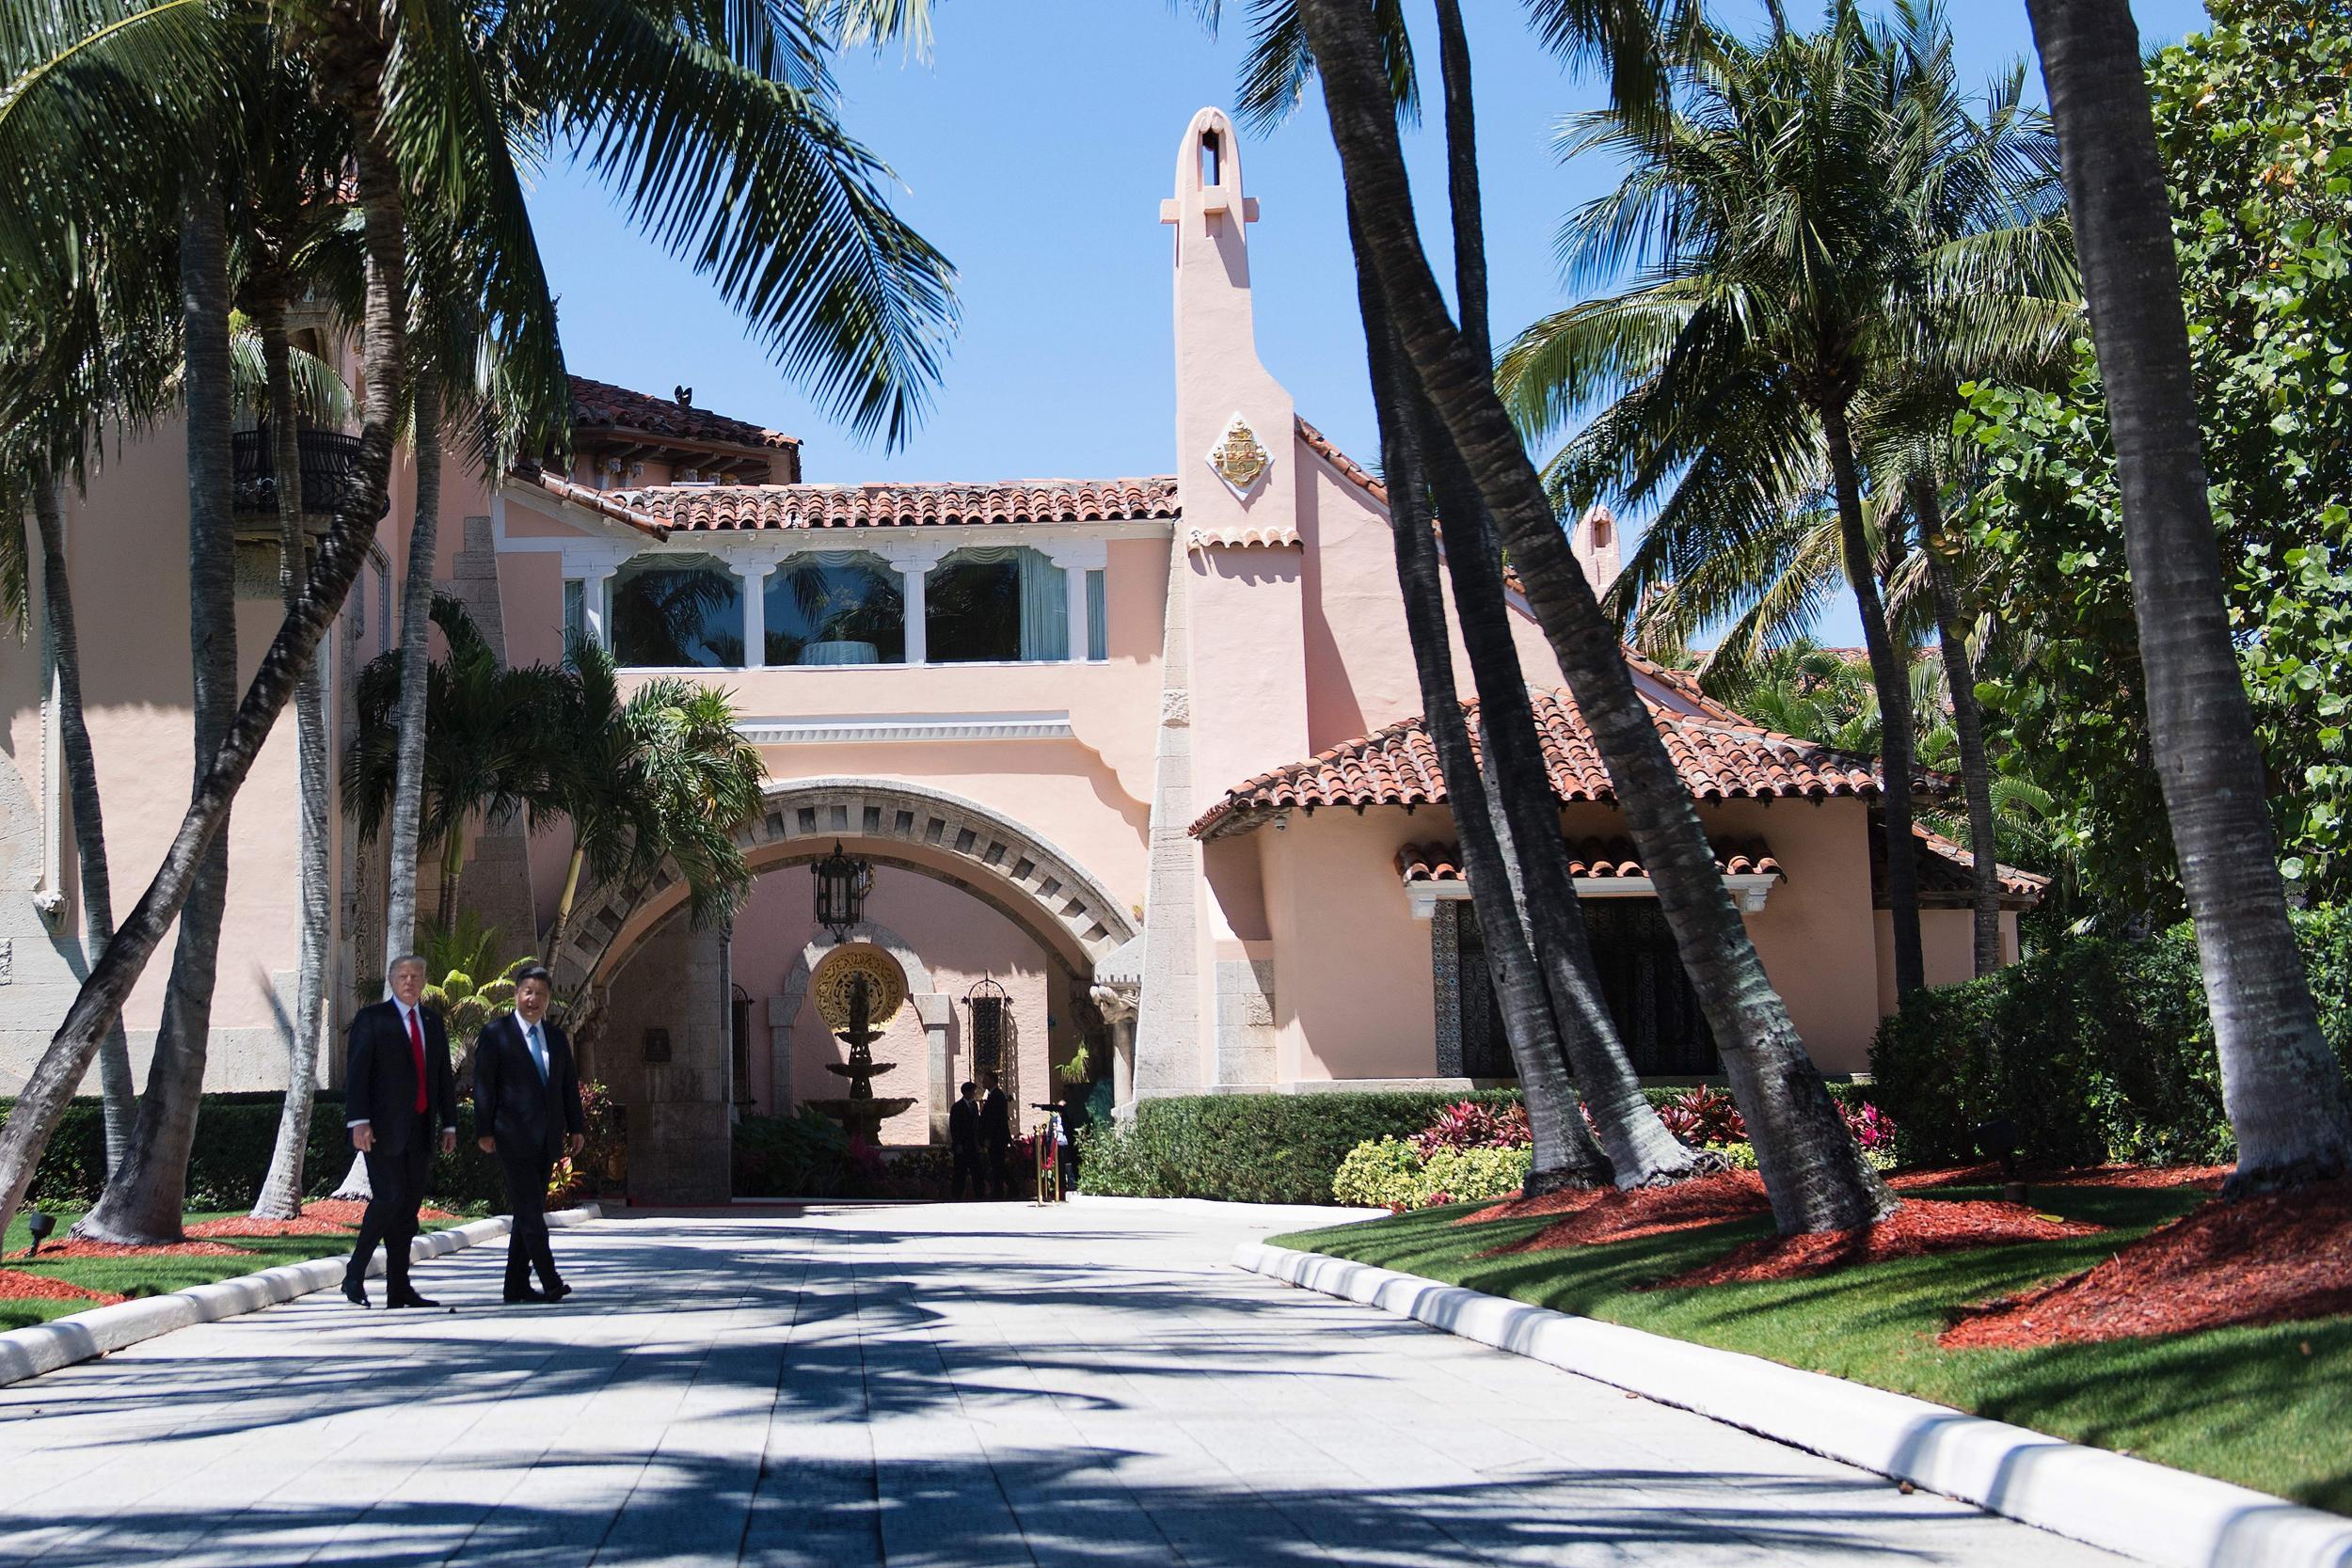 Donald Trump and Chinese President Xi Jinping walk together at the Mar-a-Lago estate in West Palm Beach, Florida